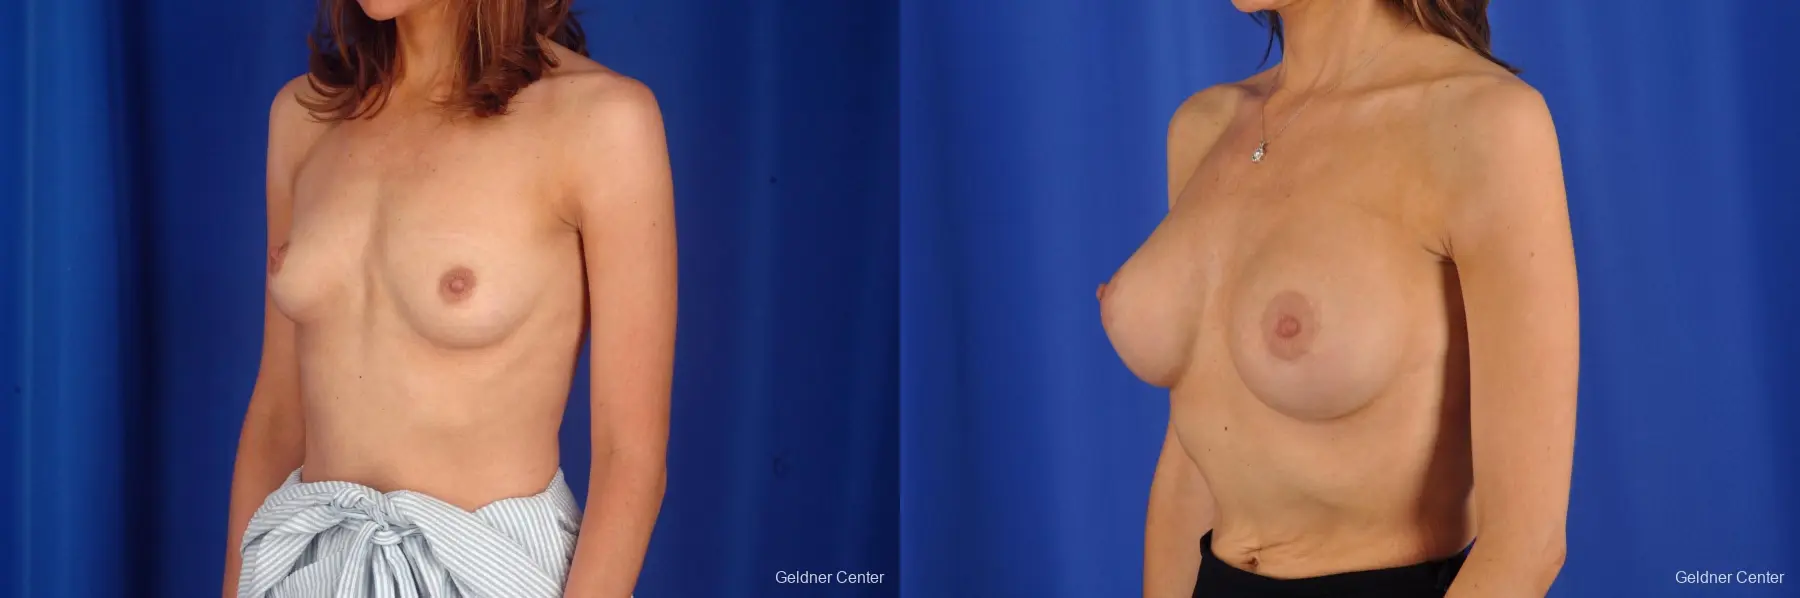 Breast Lift Chicago 2296 - Before and After 5